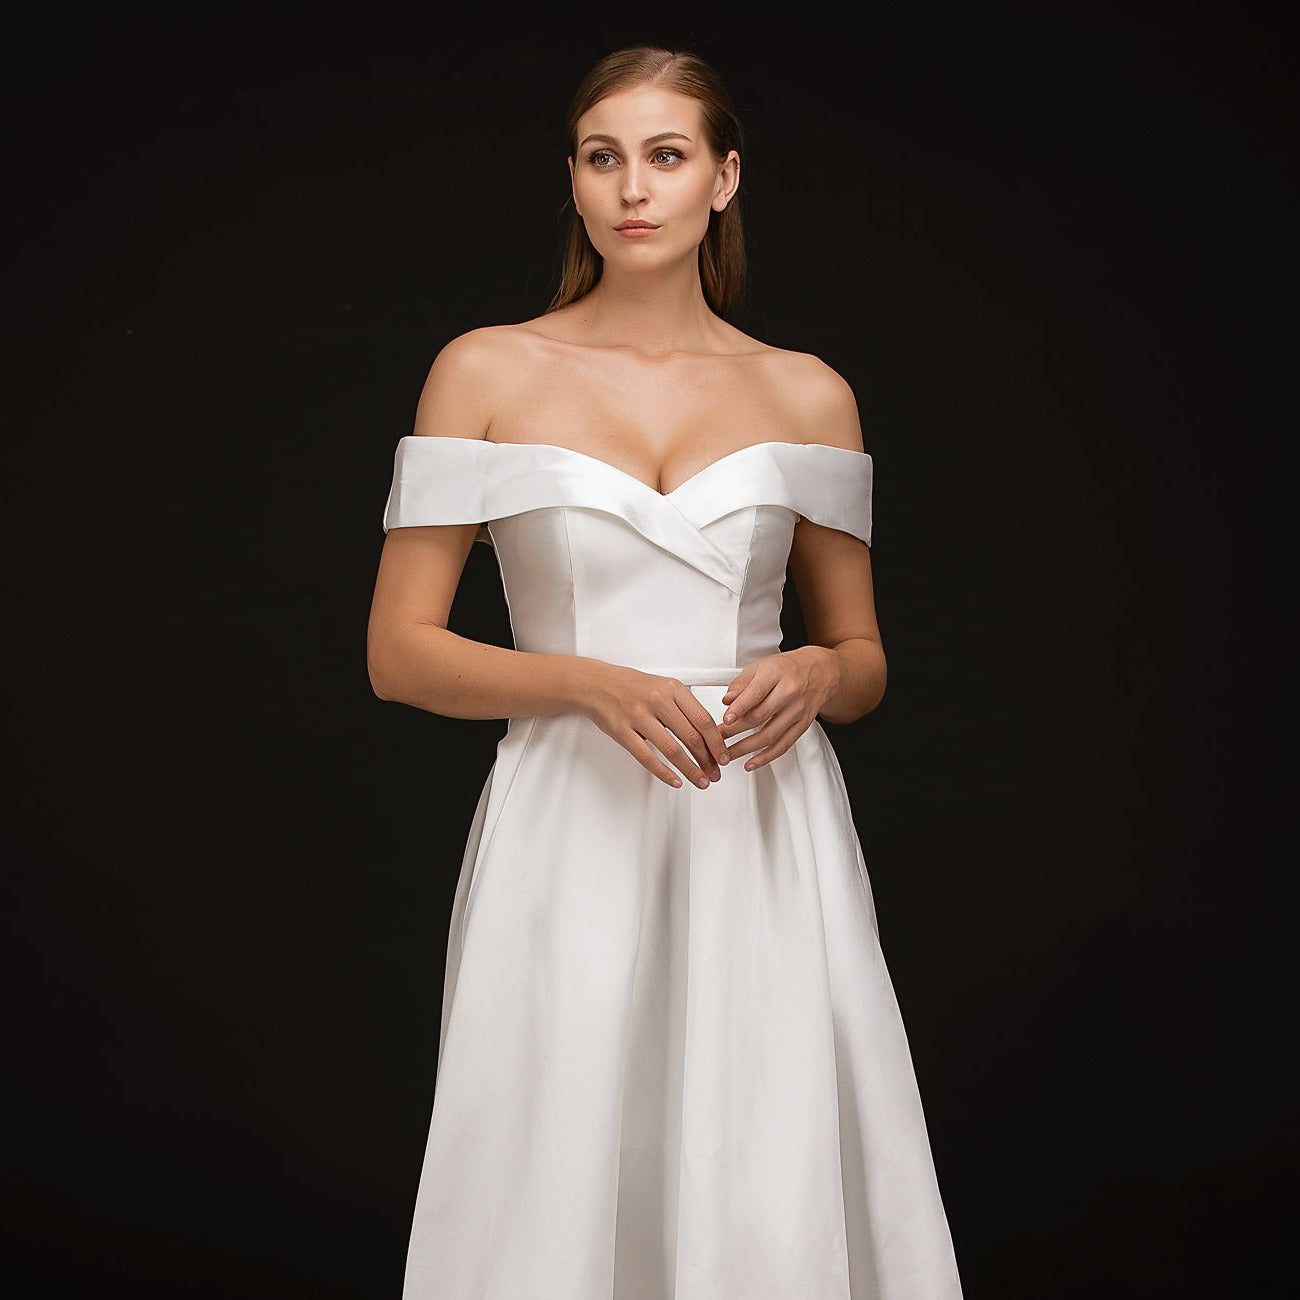 Nina Canacci B1901 off the shoulder straps with sweetheart neckline A line prom dress pageant gown evening dress or informal destination wedding or bridal gown Color Diamond White  Sizes  0, 2, 4, 6, 8, 10, 12, 14, 16, 18, 20, 22, 24